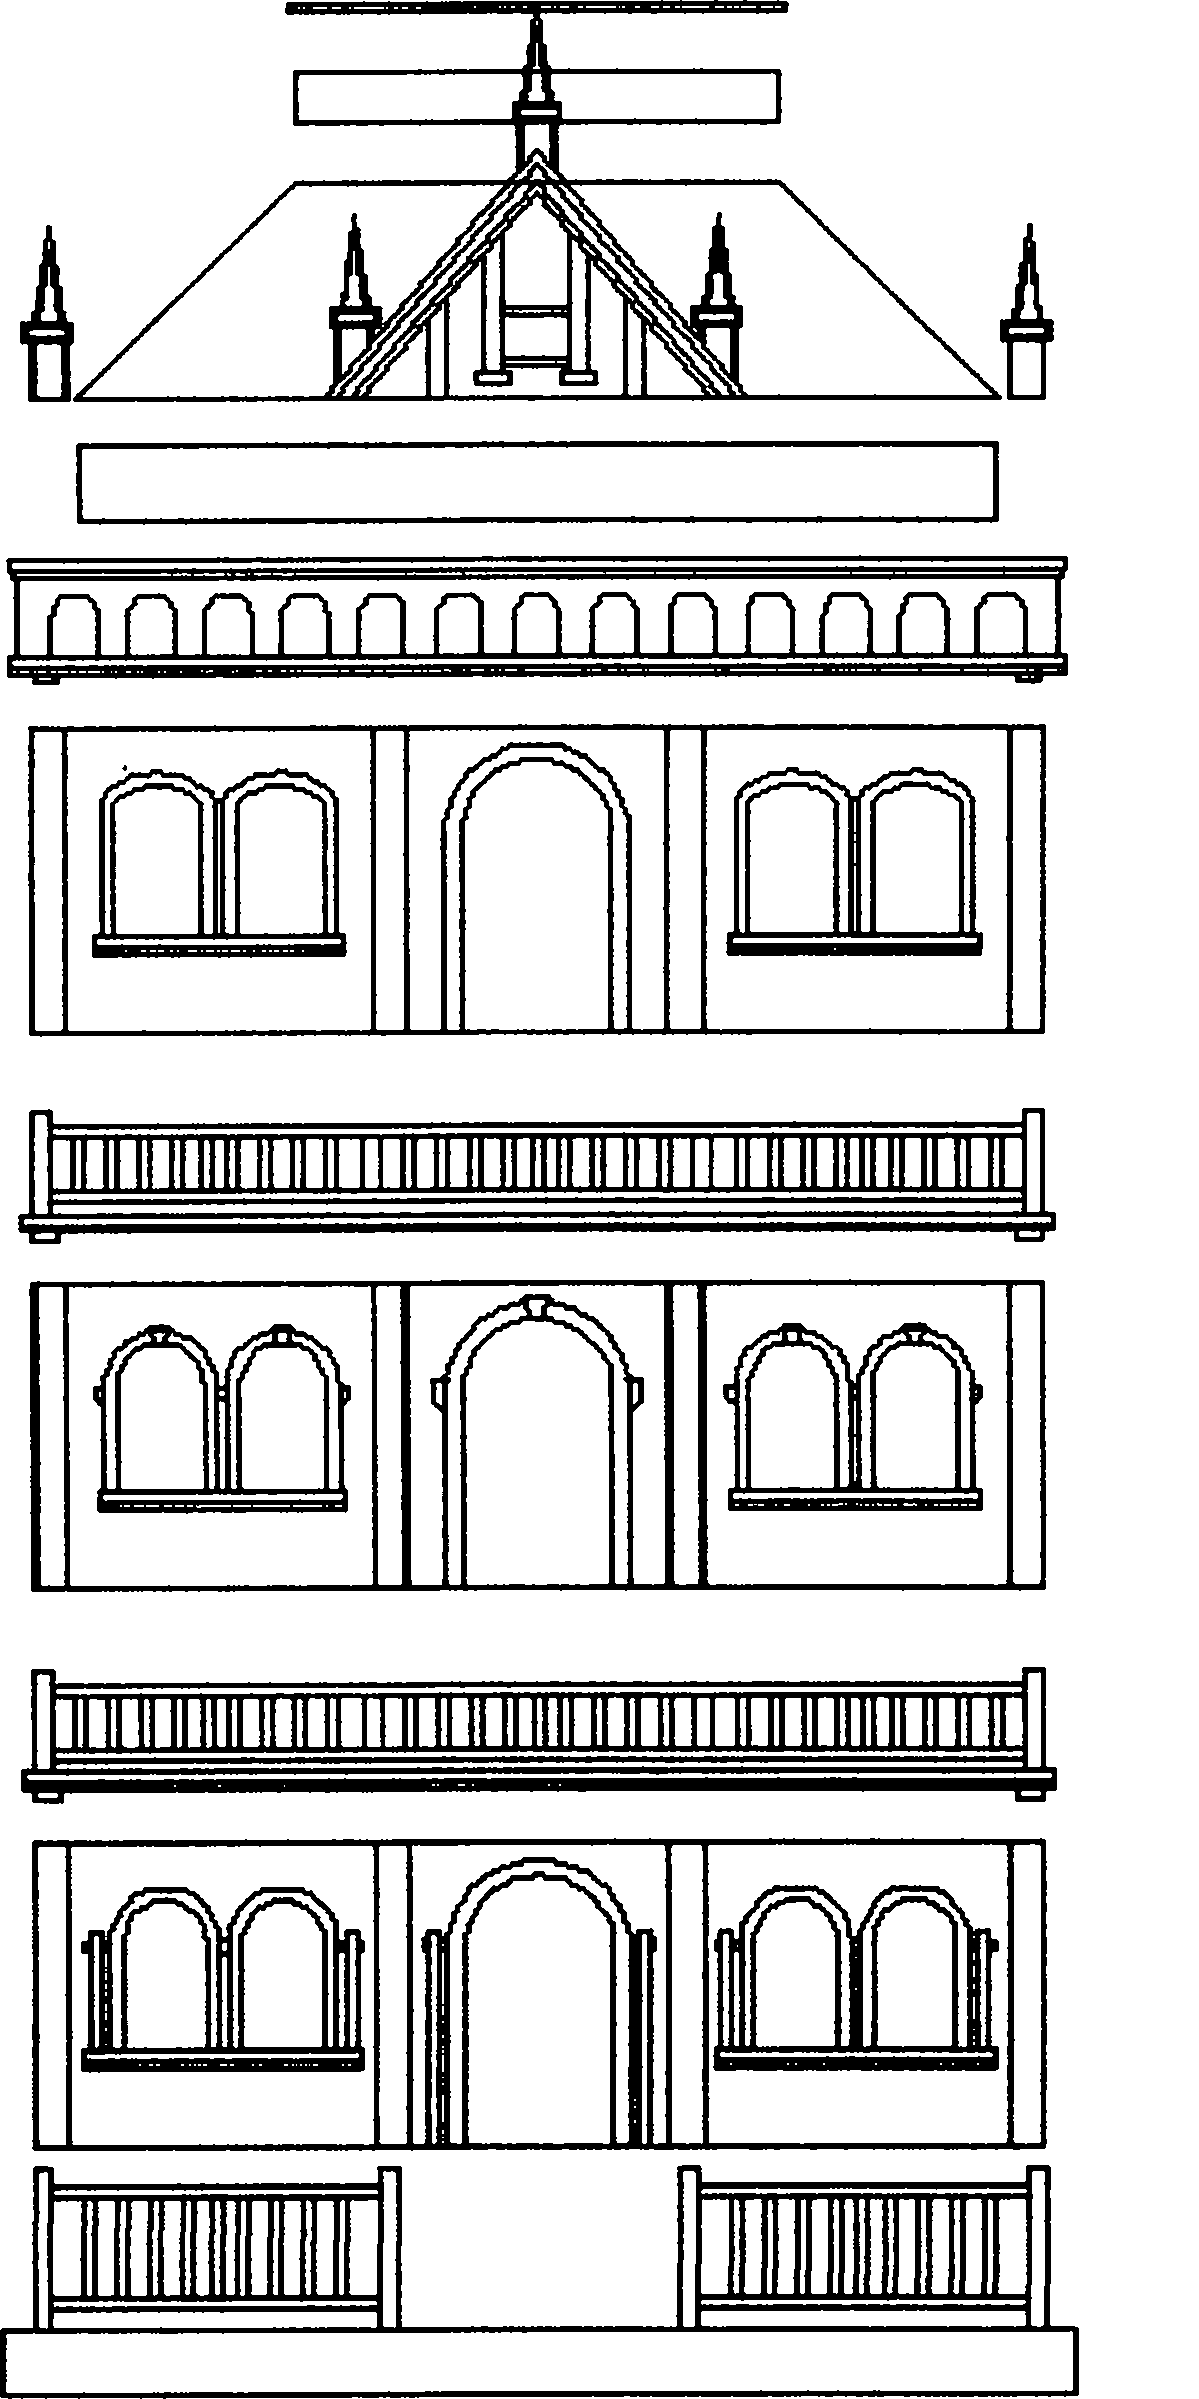 Family ancestral hall type laminated combined tomb villa